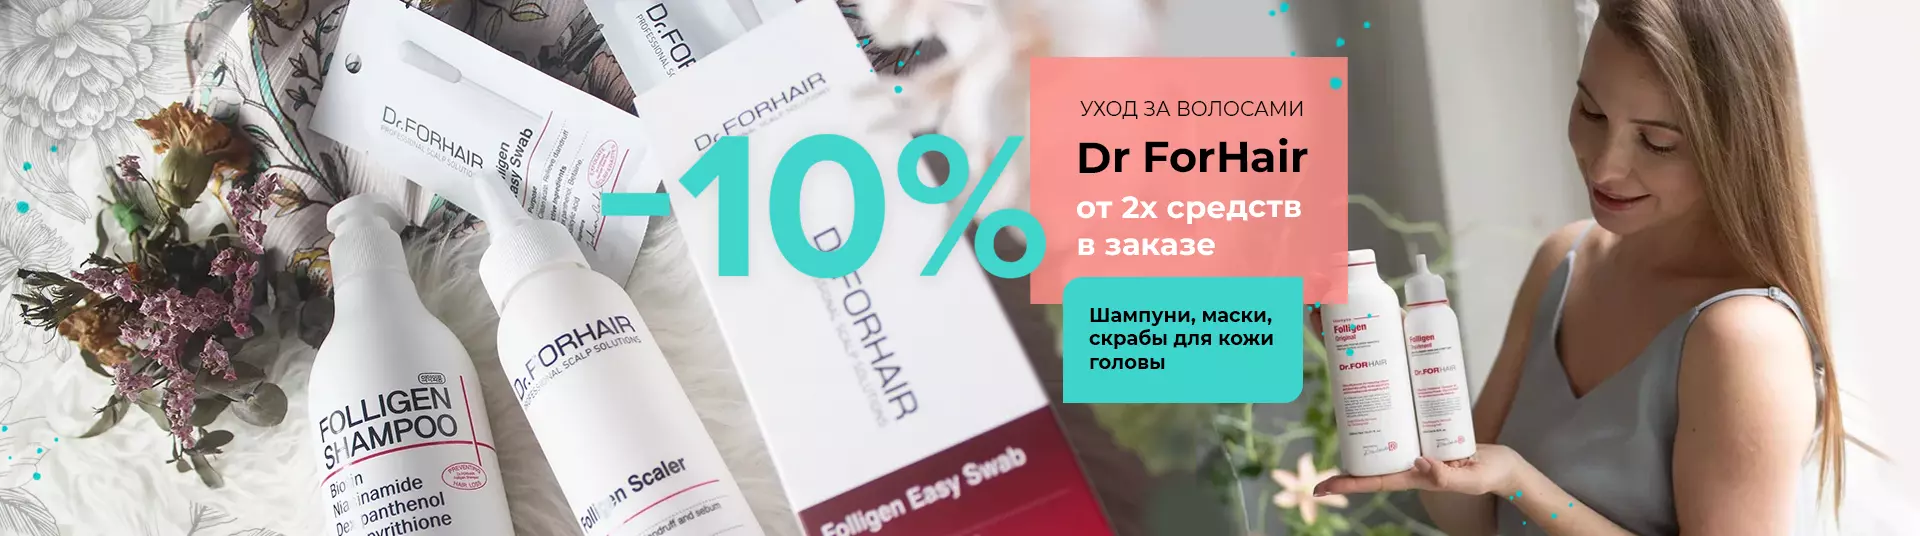 sale_dr-for-hair